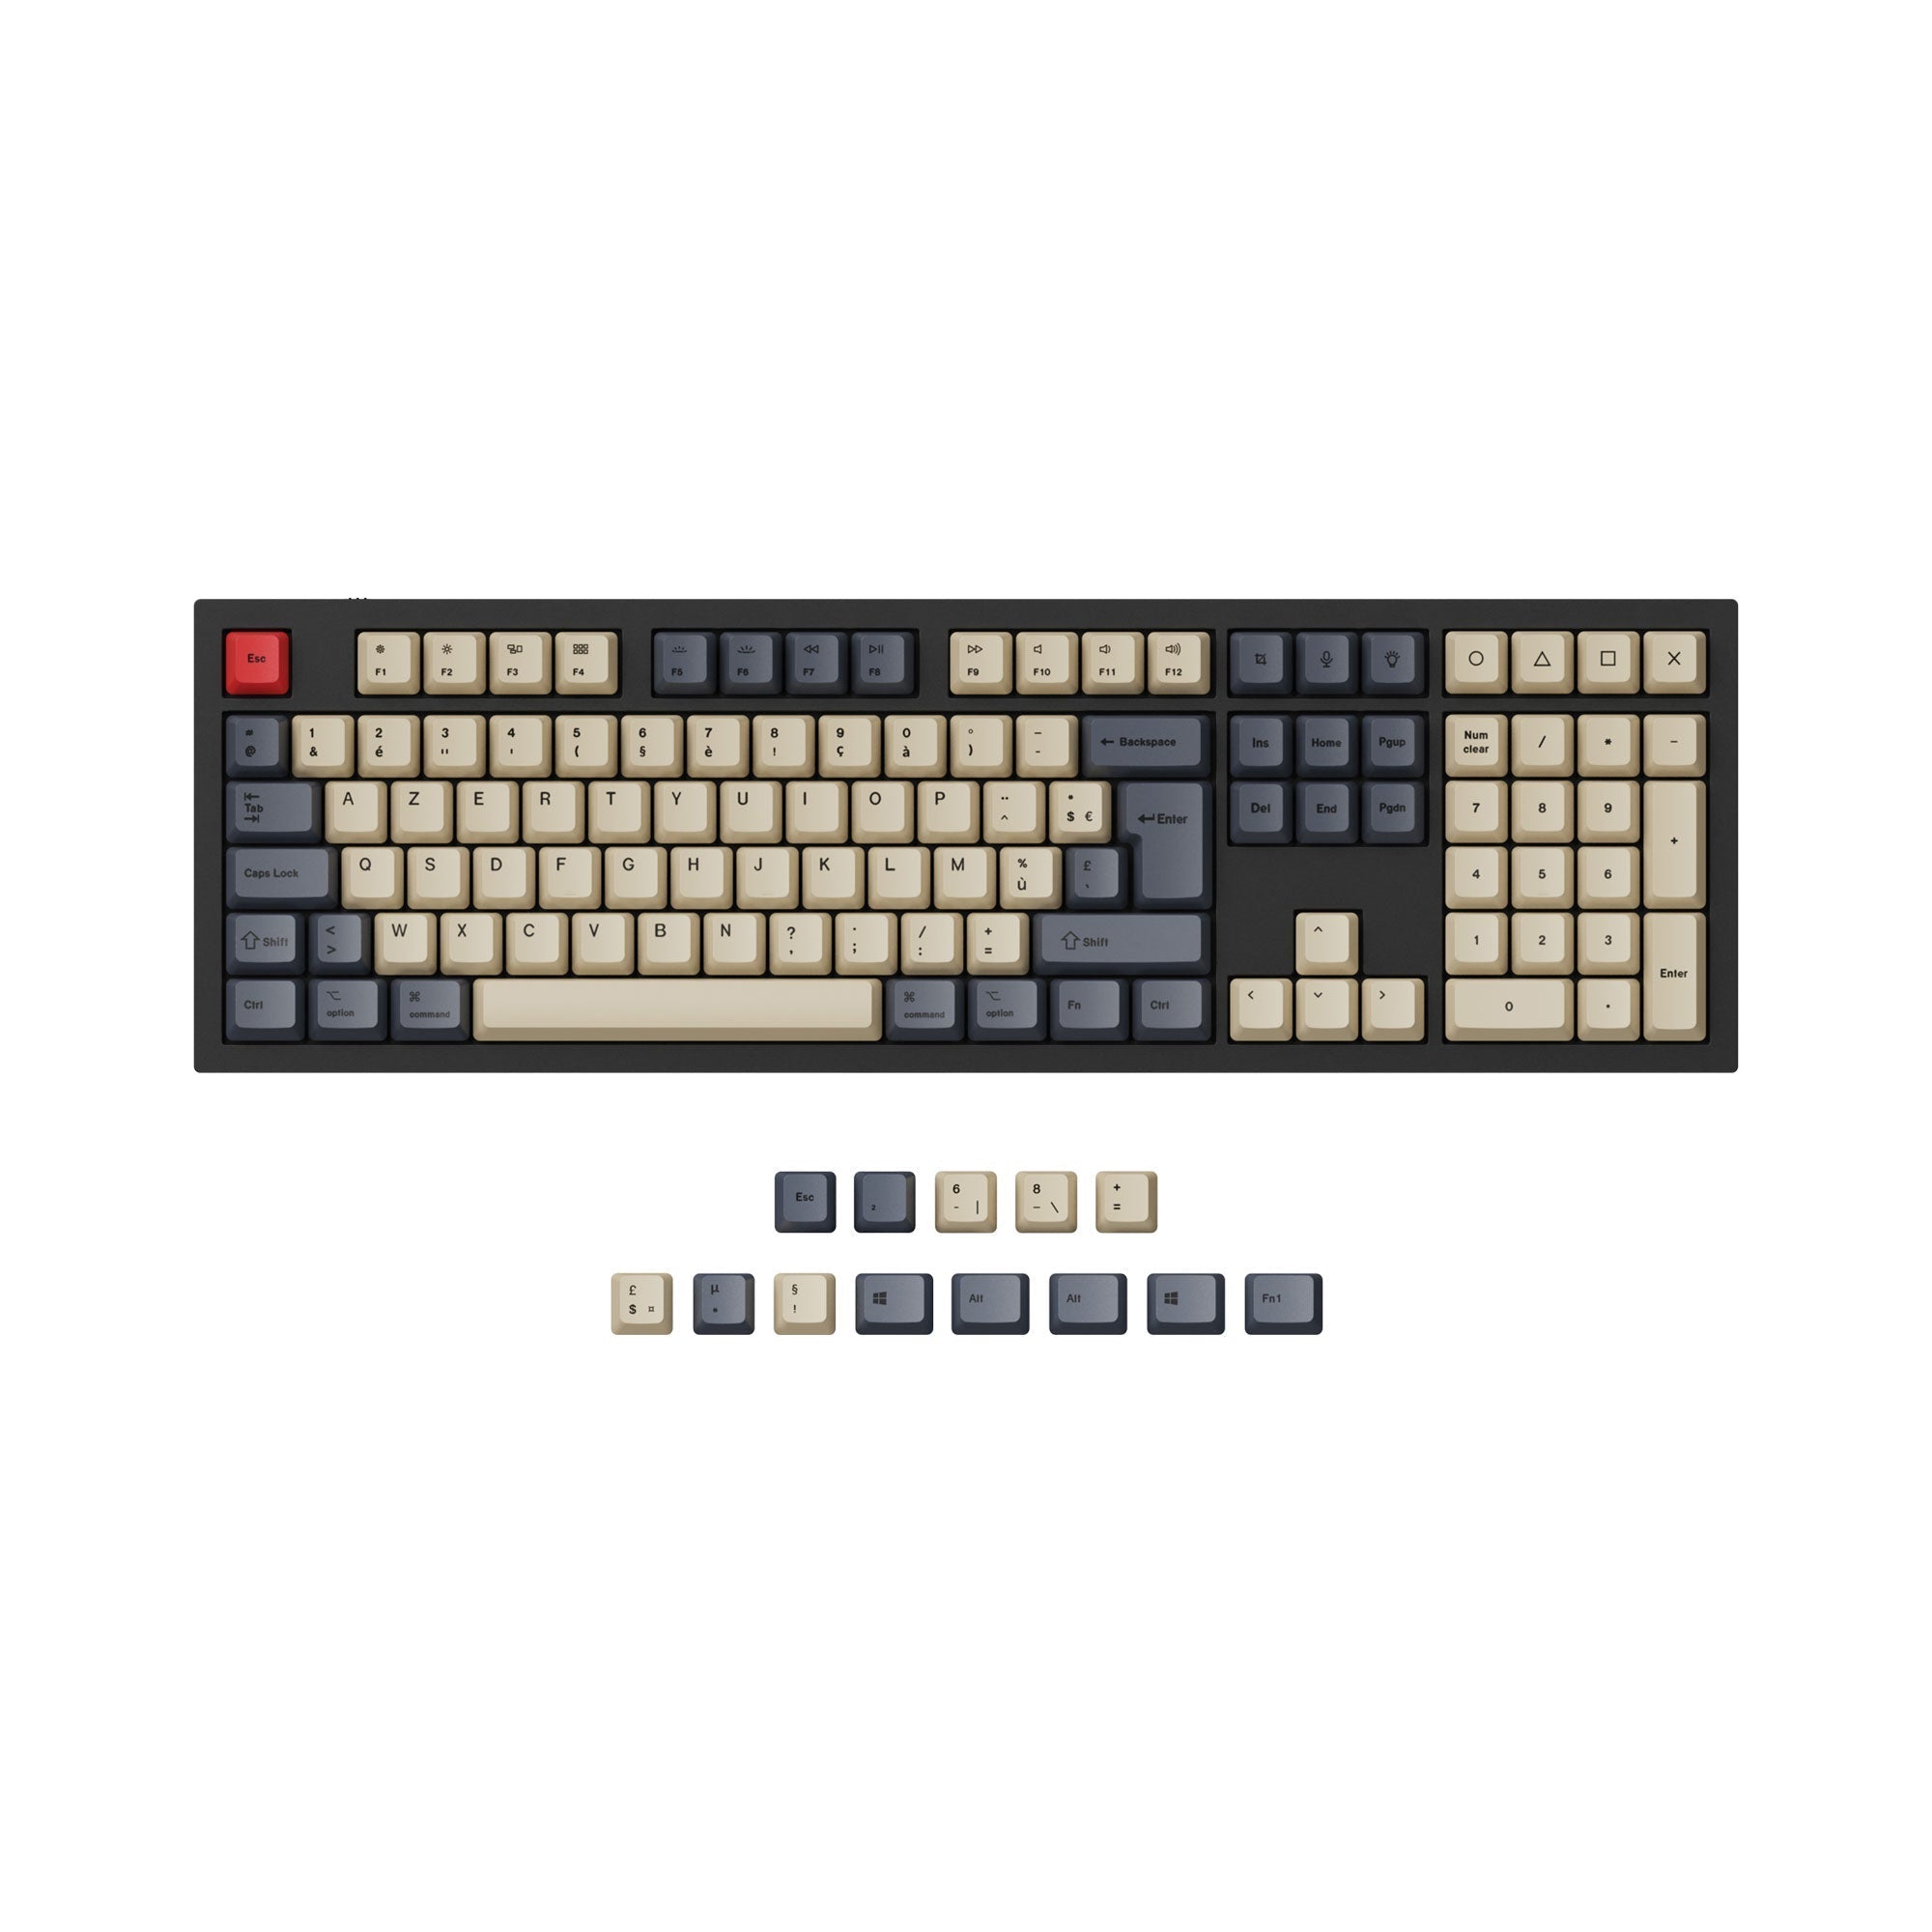 ISO ANSI OEM Dye-Sub PBT Keycap Set Carbon Color French Layout For Q3 Q4 Q6 K8 Keyboard